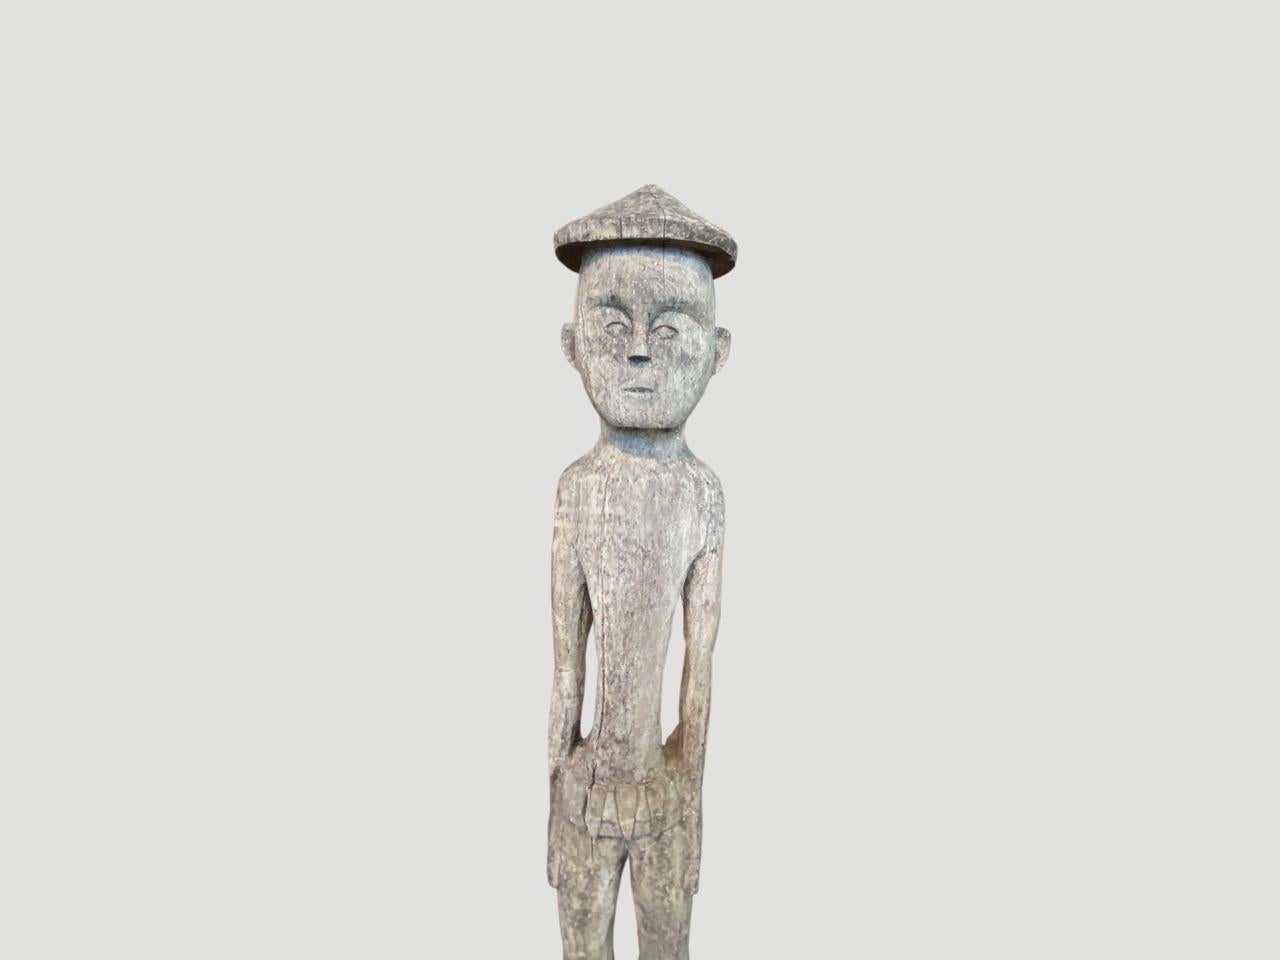 Antique male statue hand carved from a single teak wood log from West Borneo. Originally used to protect the home from evil spirits and placed into the ground in front of the house as a guardian. We have added a modern metal black base.

This